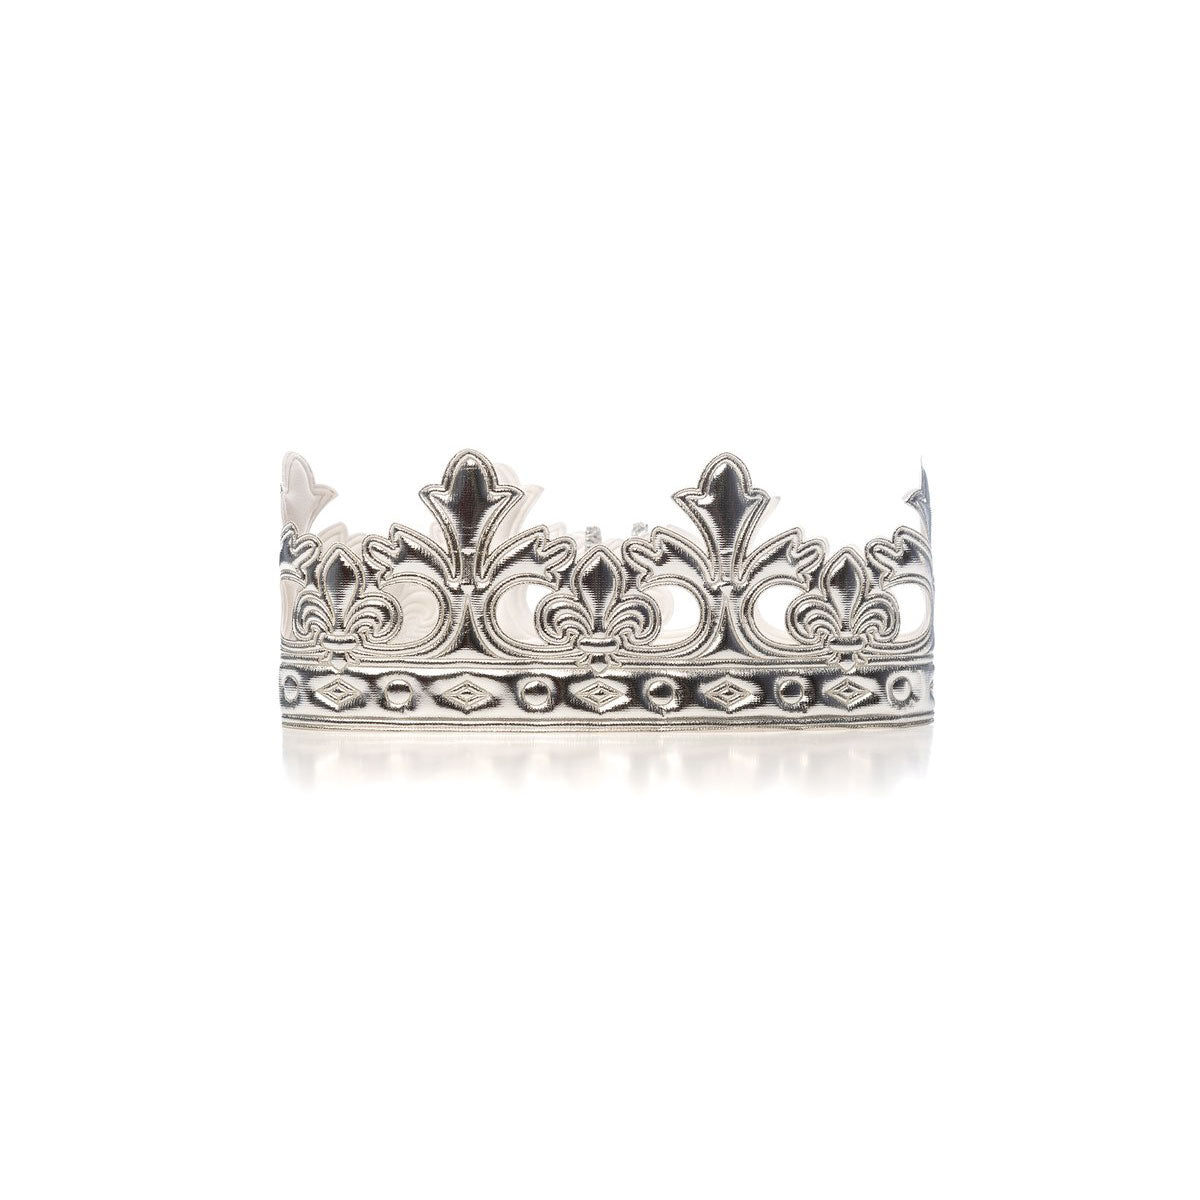 Silver Prince Soft Crowns from Little Adventures